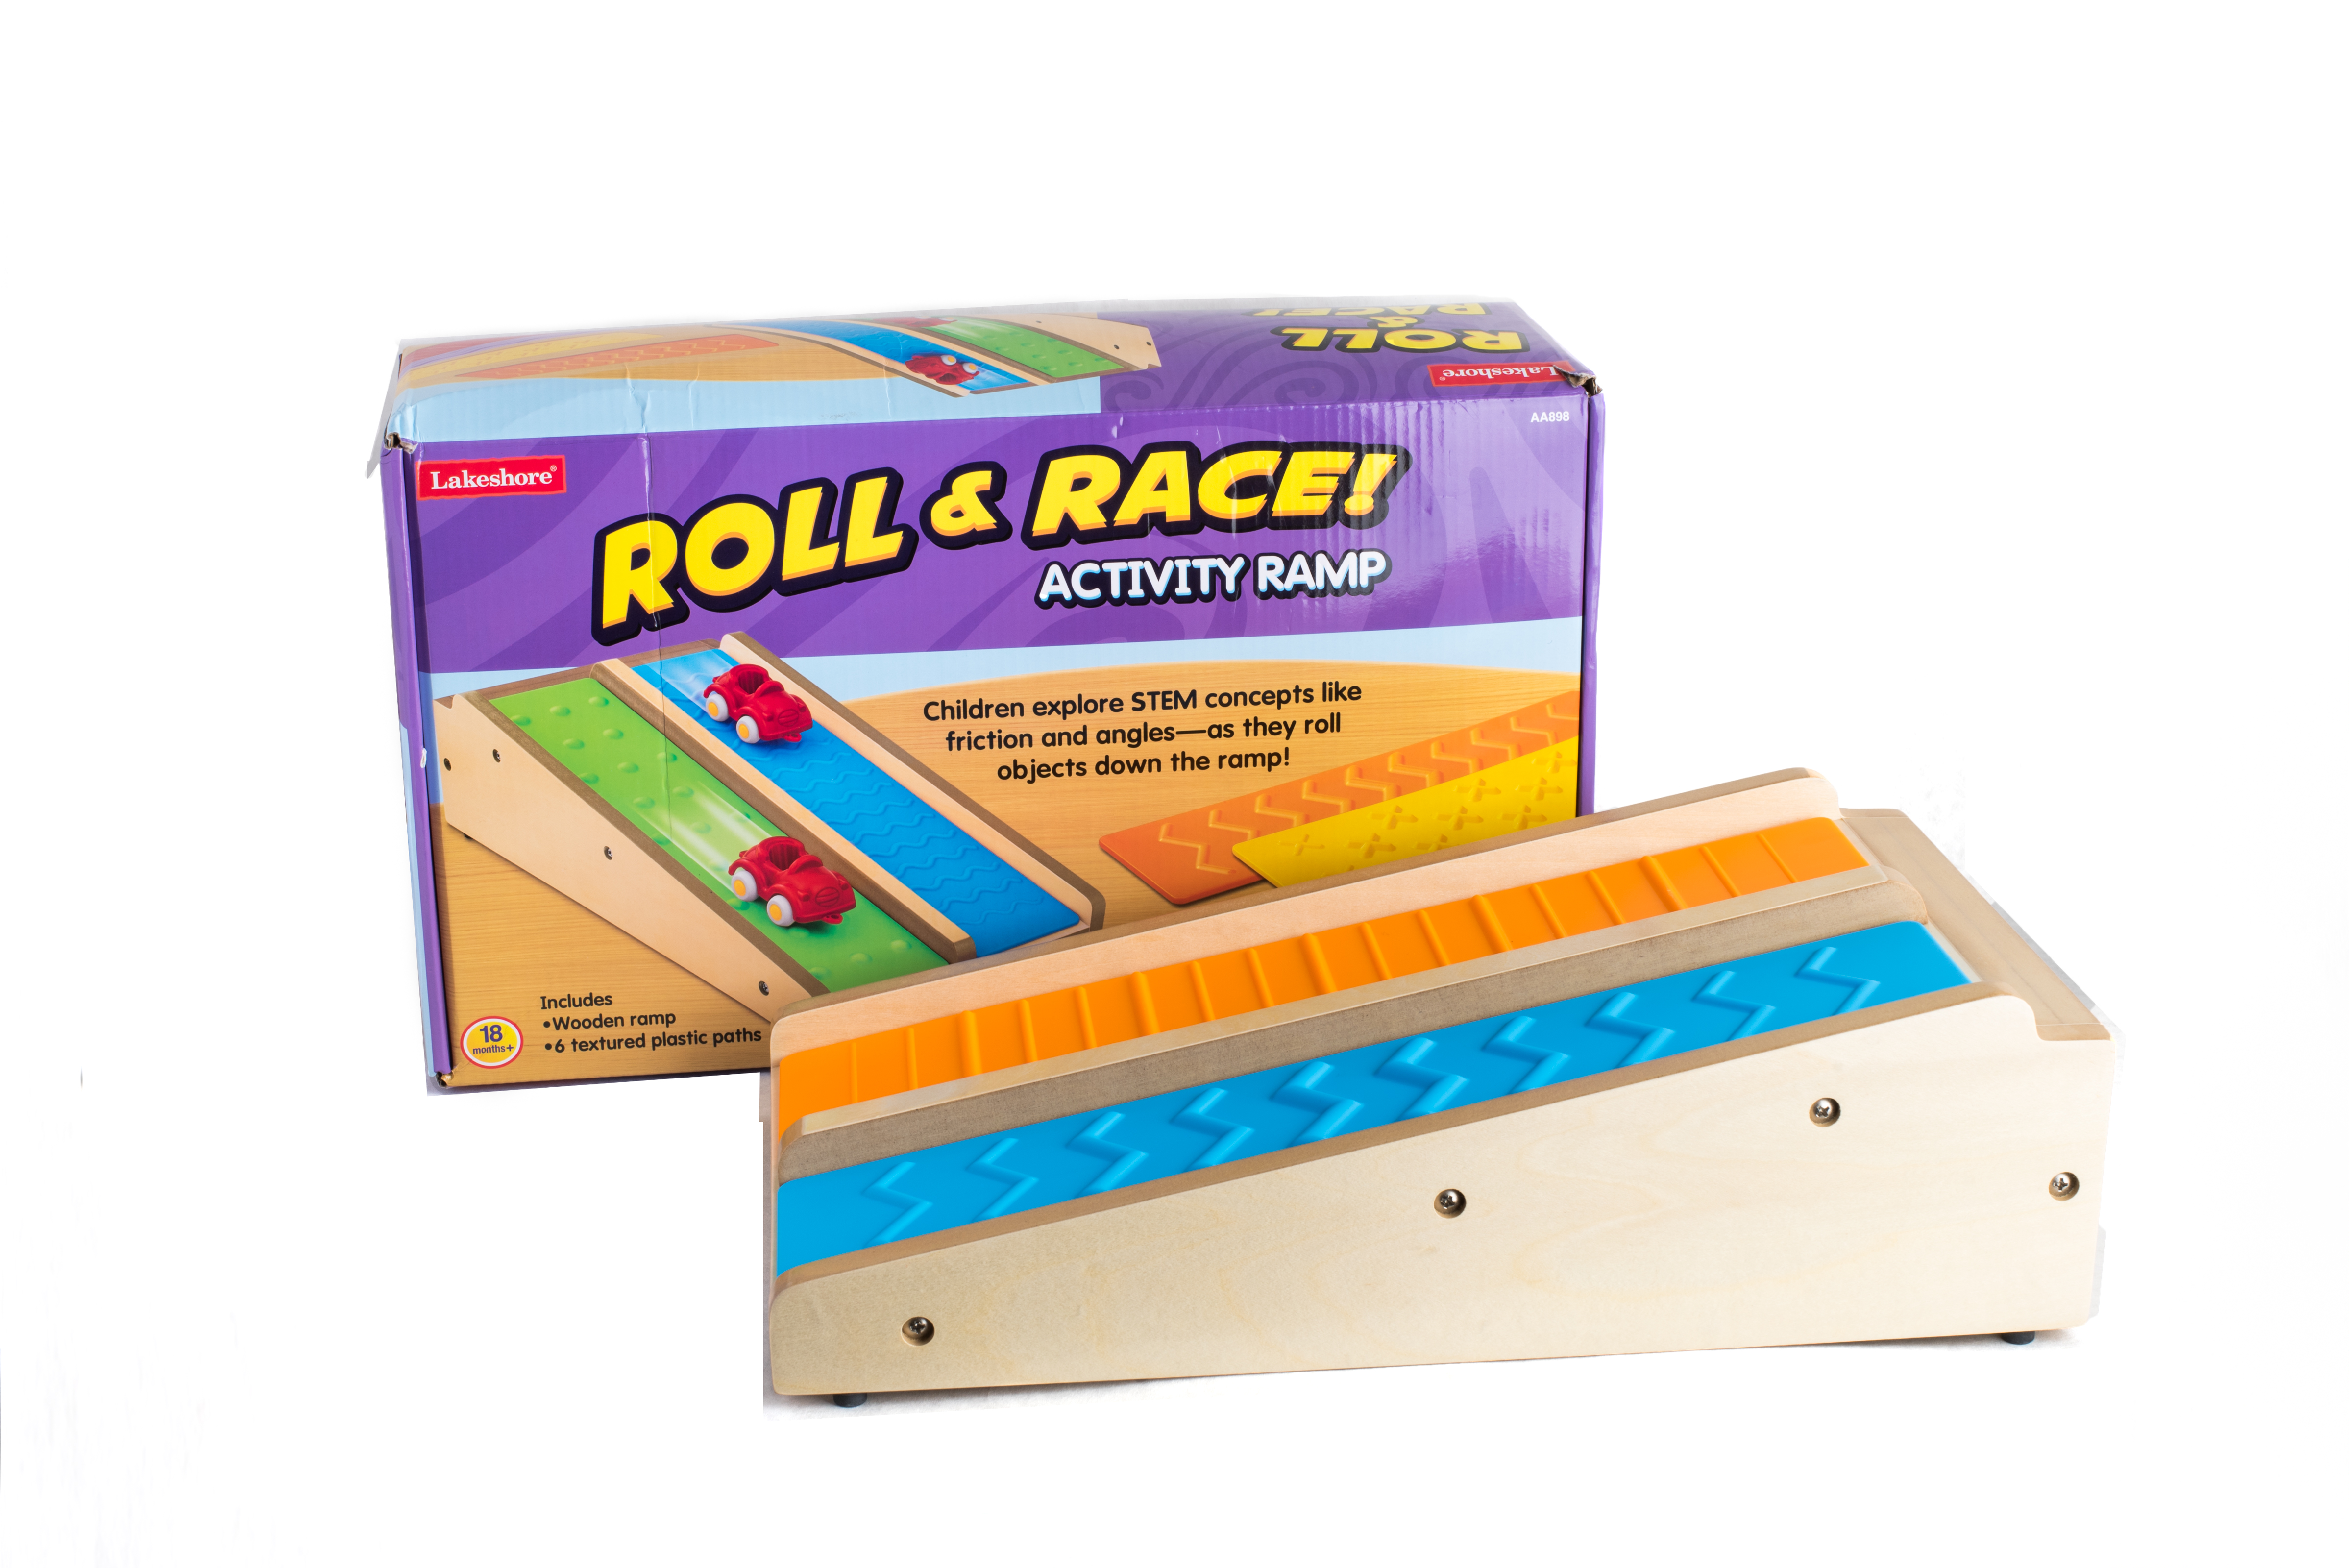 stem roll and race image